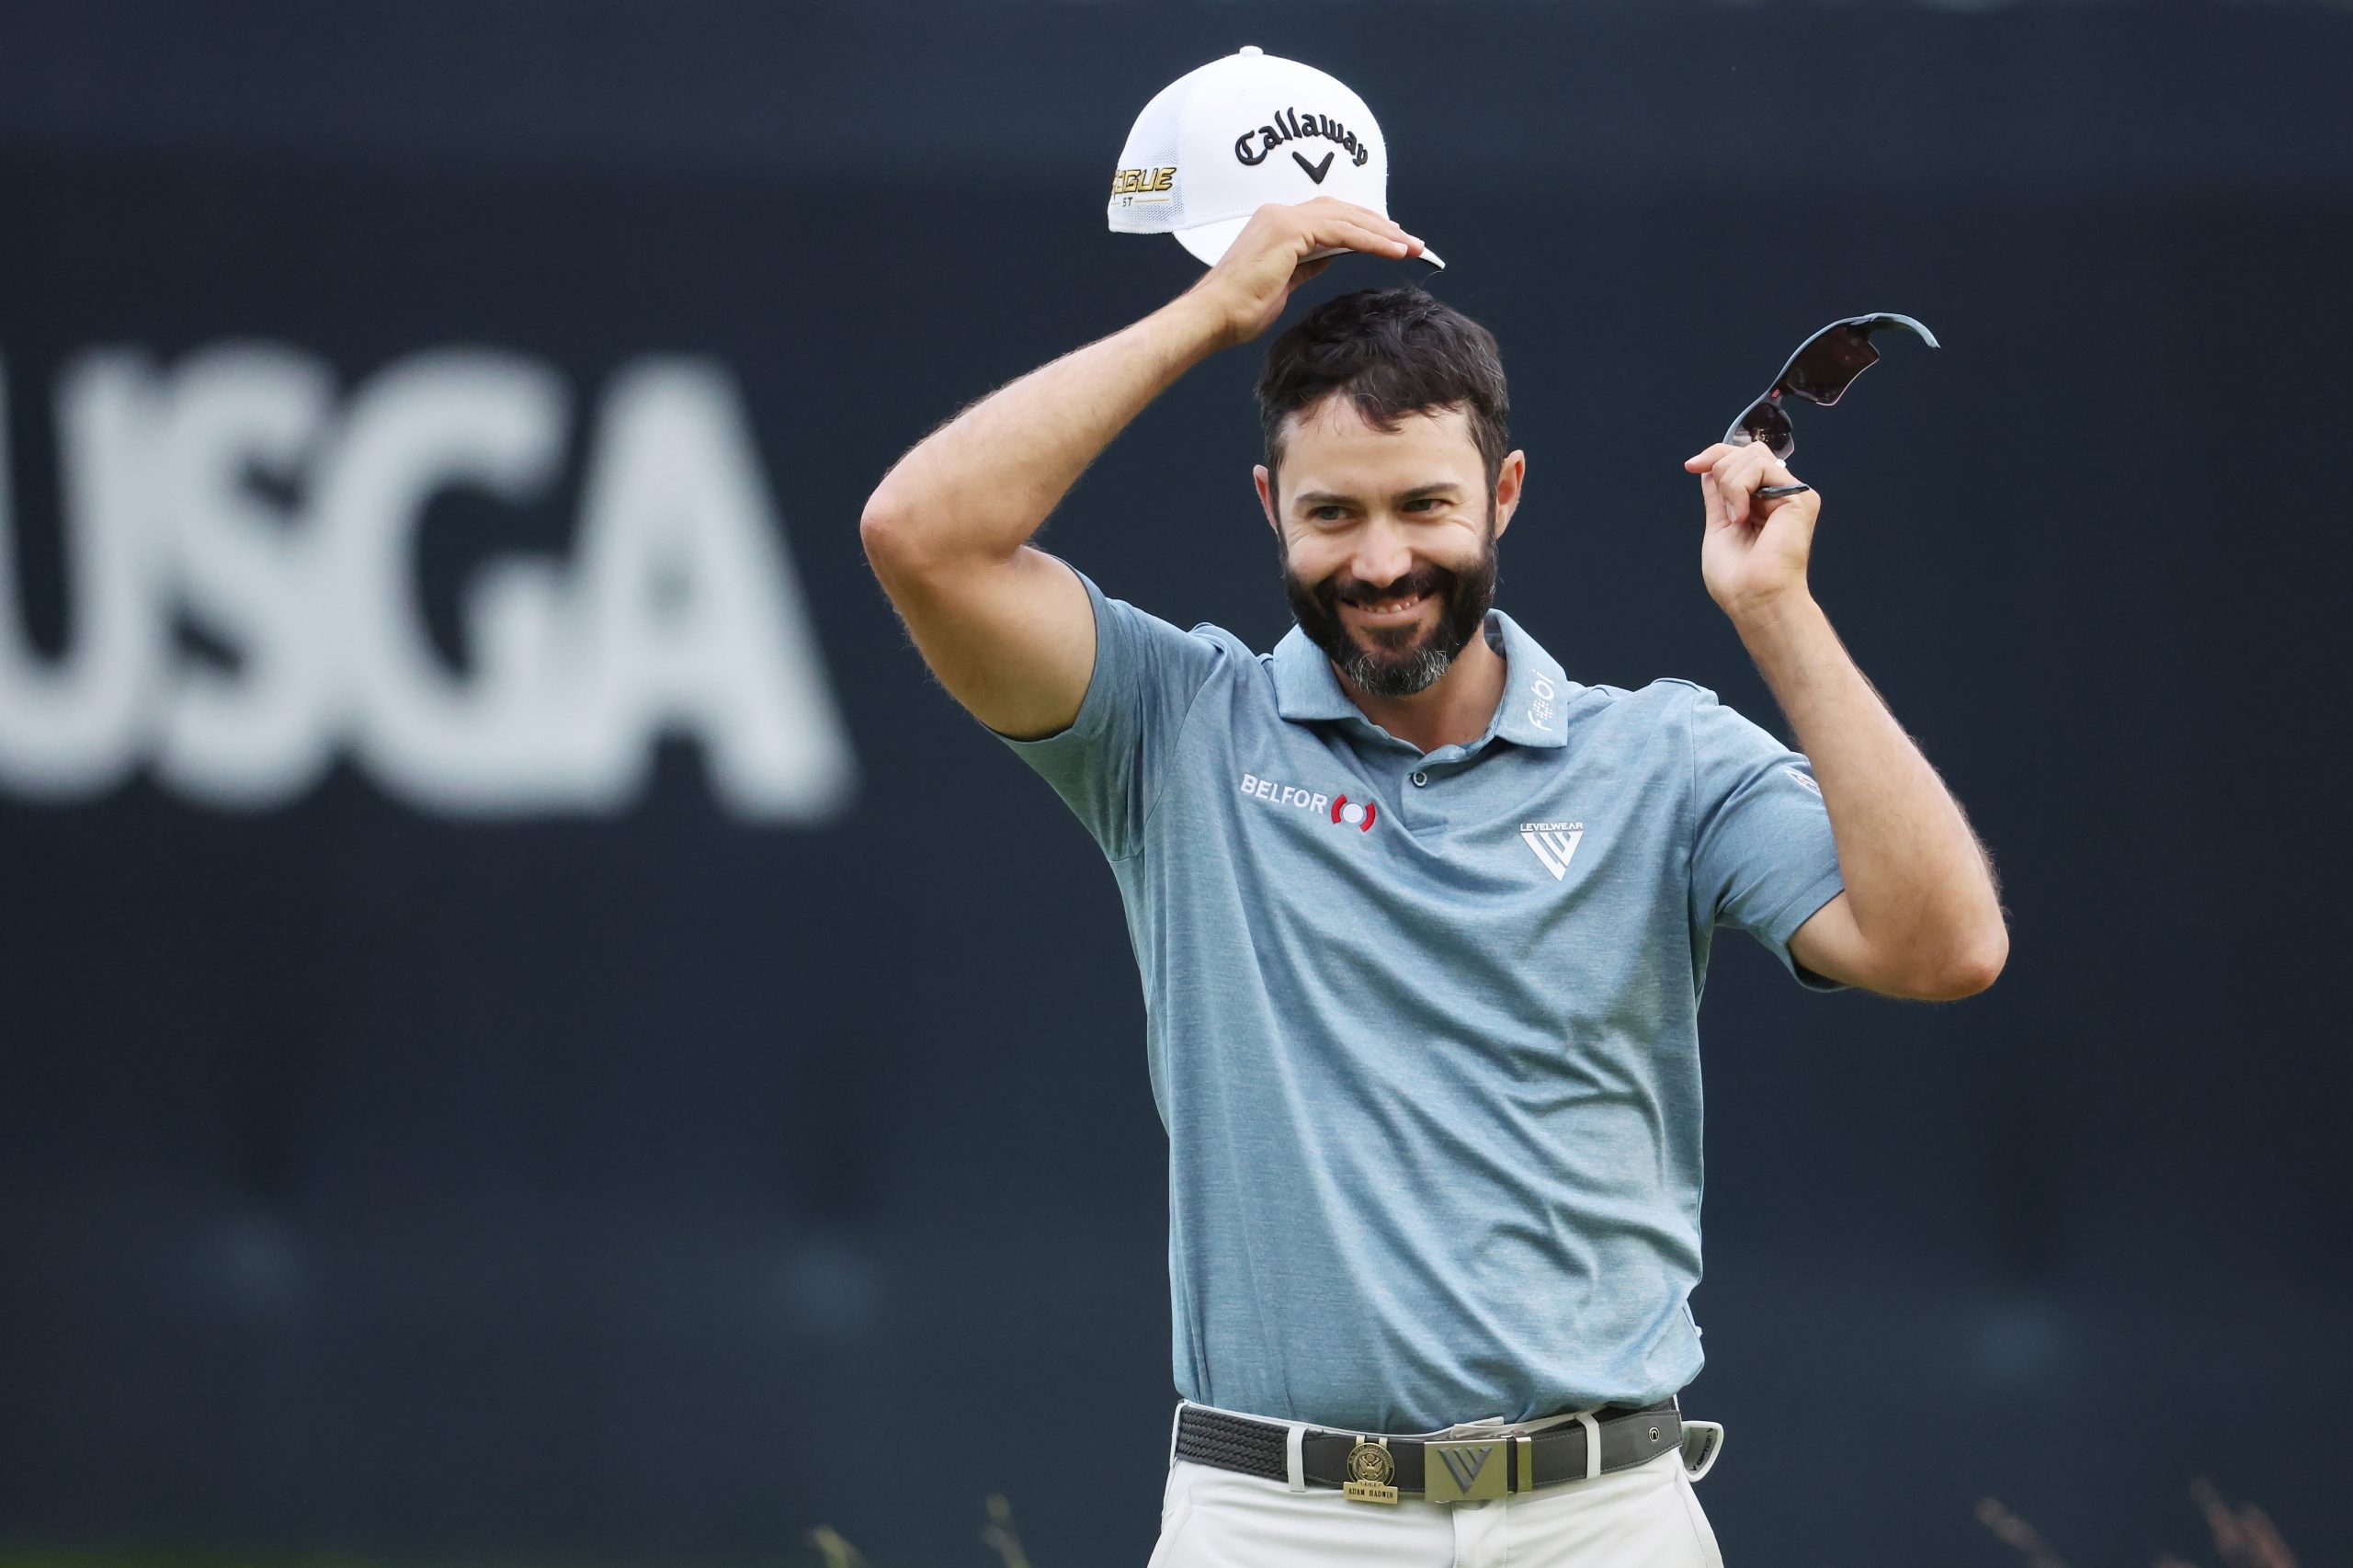 U.S. OPEN Canadian Adam Hadwin leads after first round in Brookline